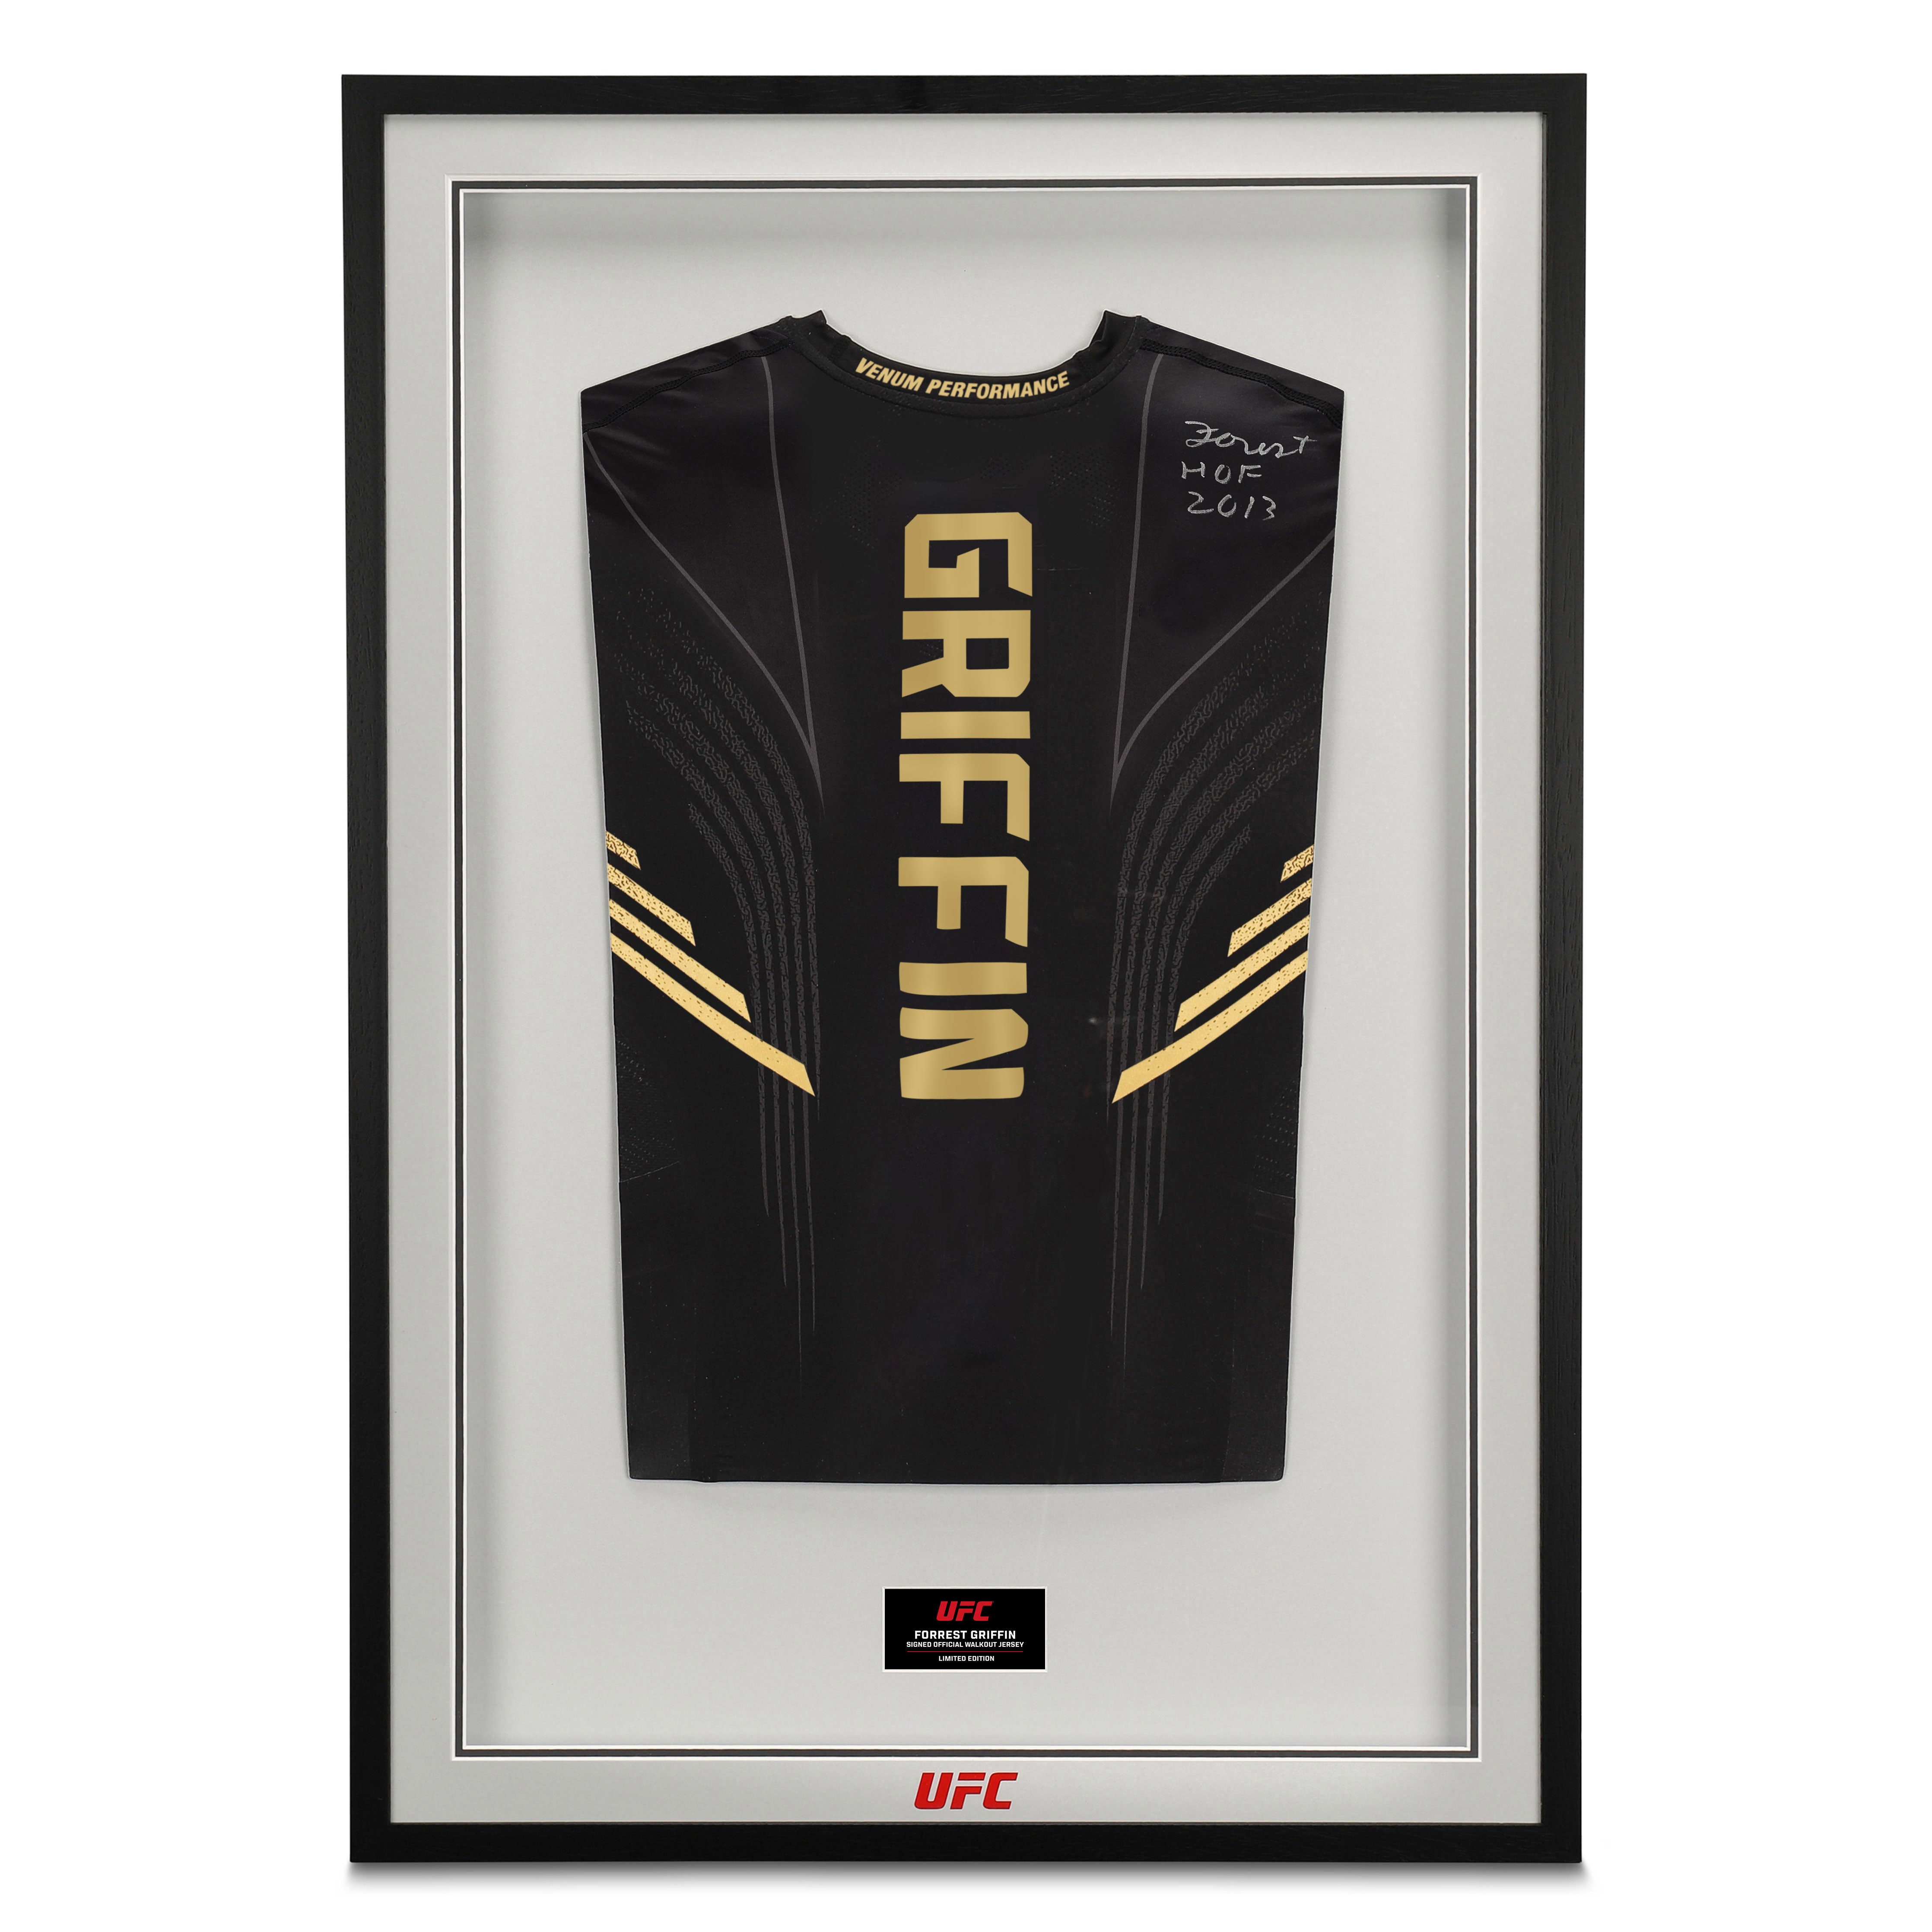 Forrest Griffin Signed UFC Champion Walkout Jersey